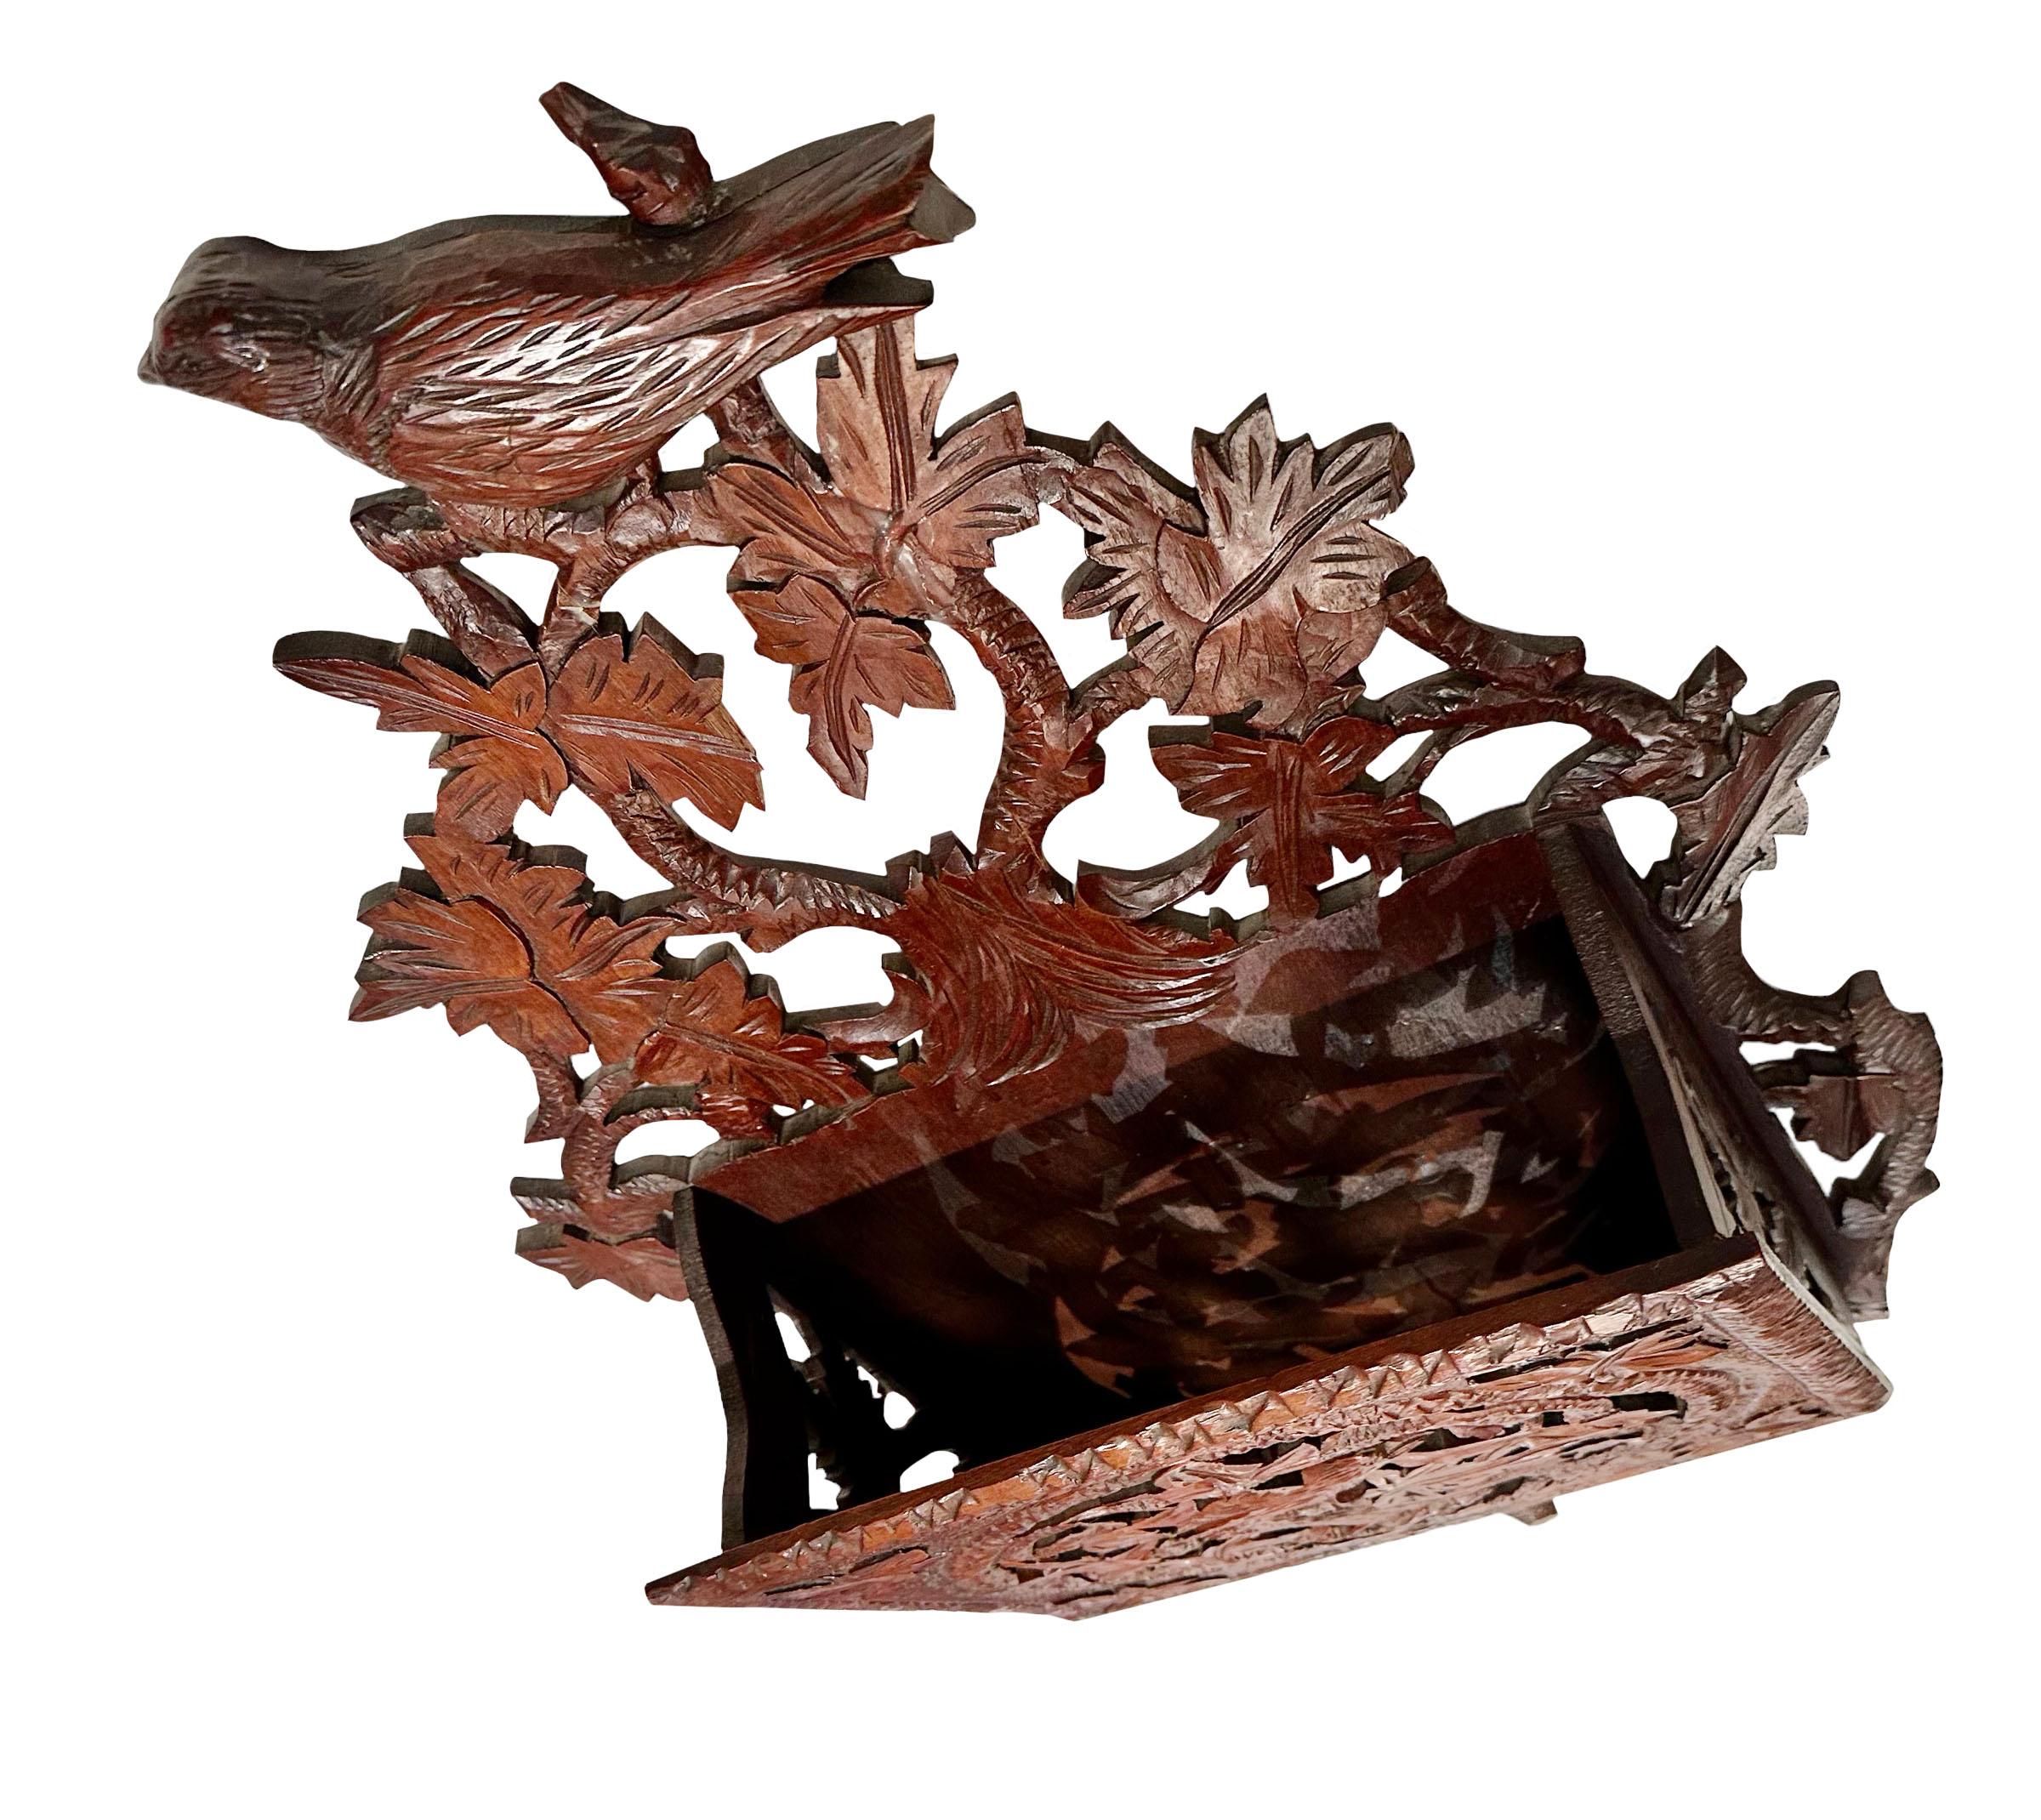 An 1890s German, Black Forest carved wooden newspaper and magazine rack with intricate carvings and a birds, vines and leaves.